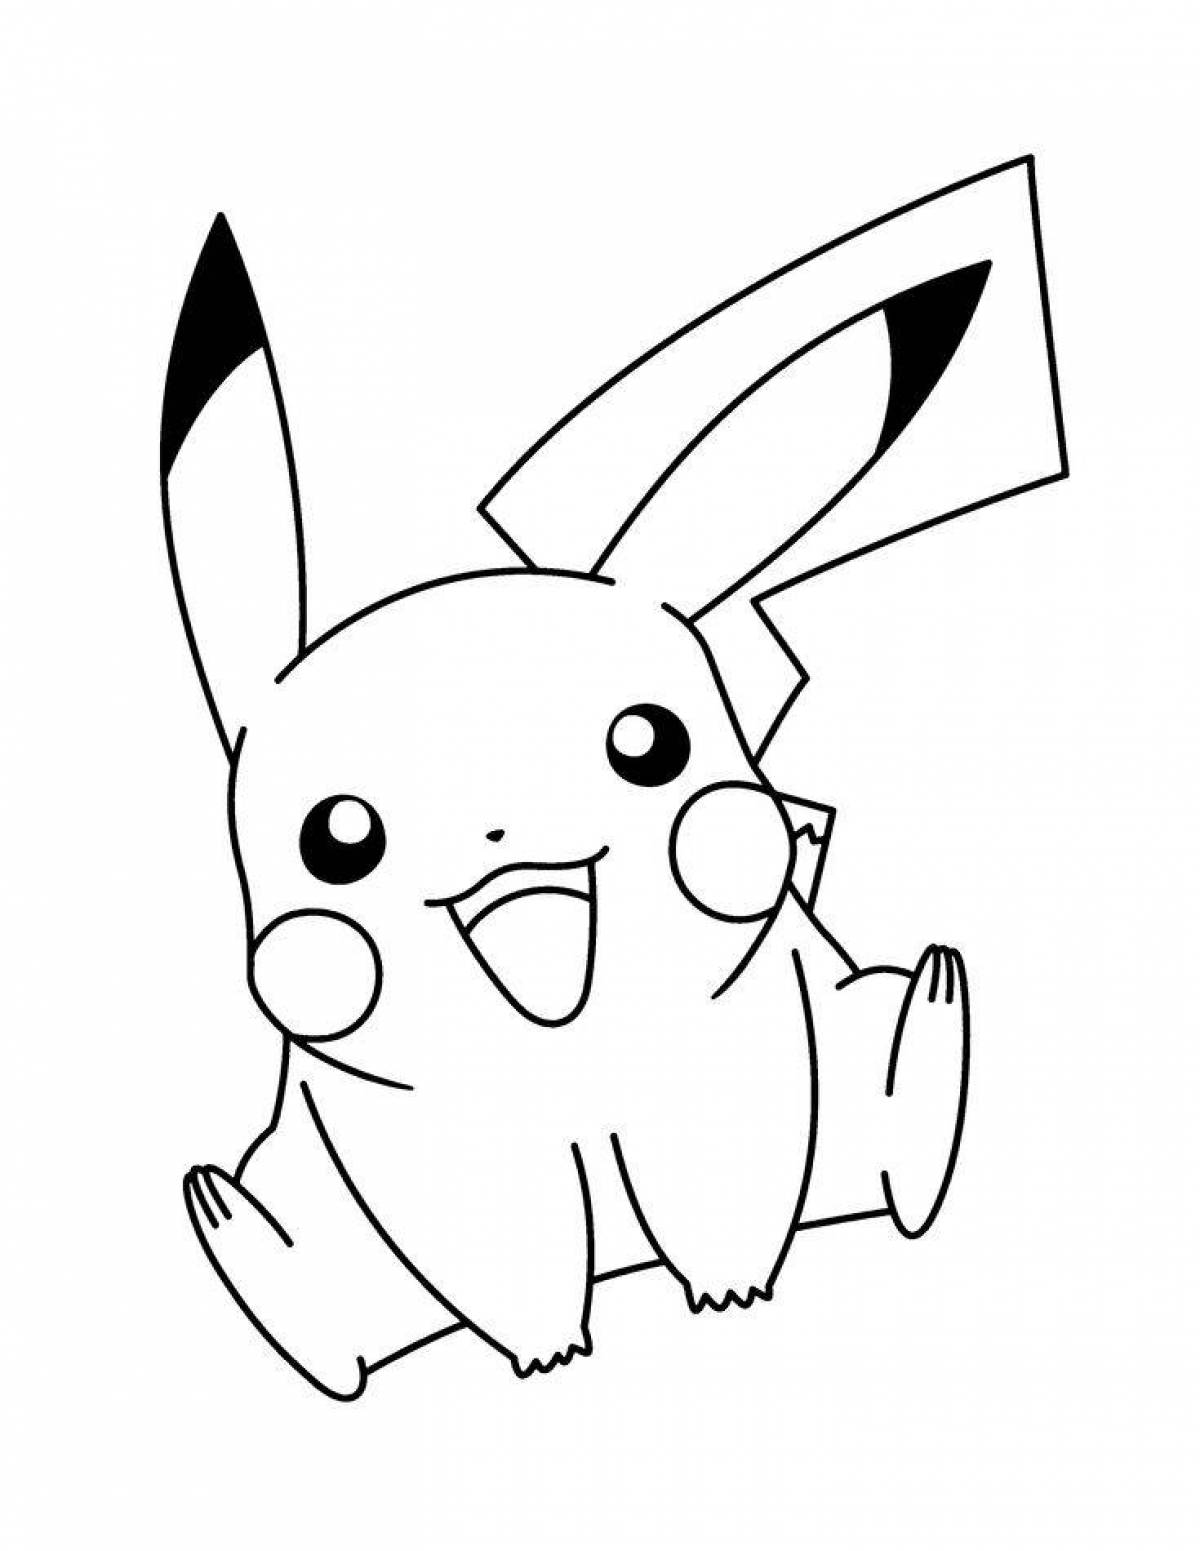 Pikachu pictures #2